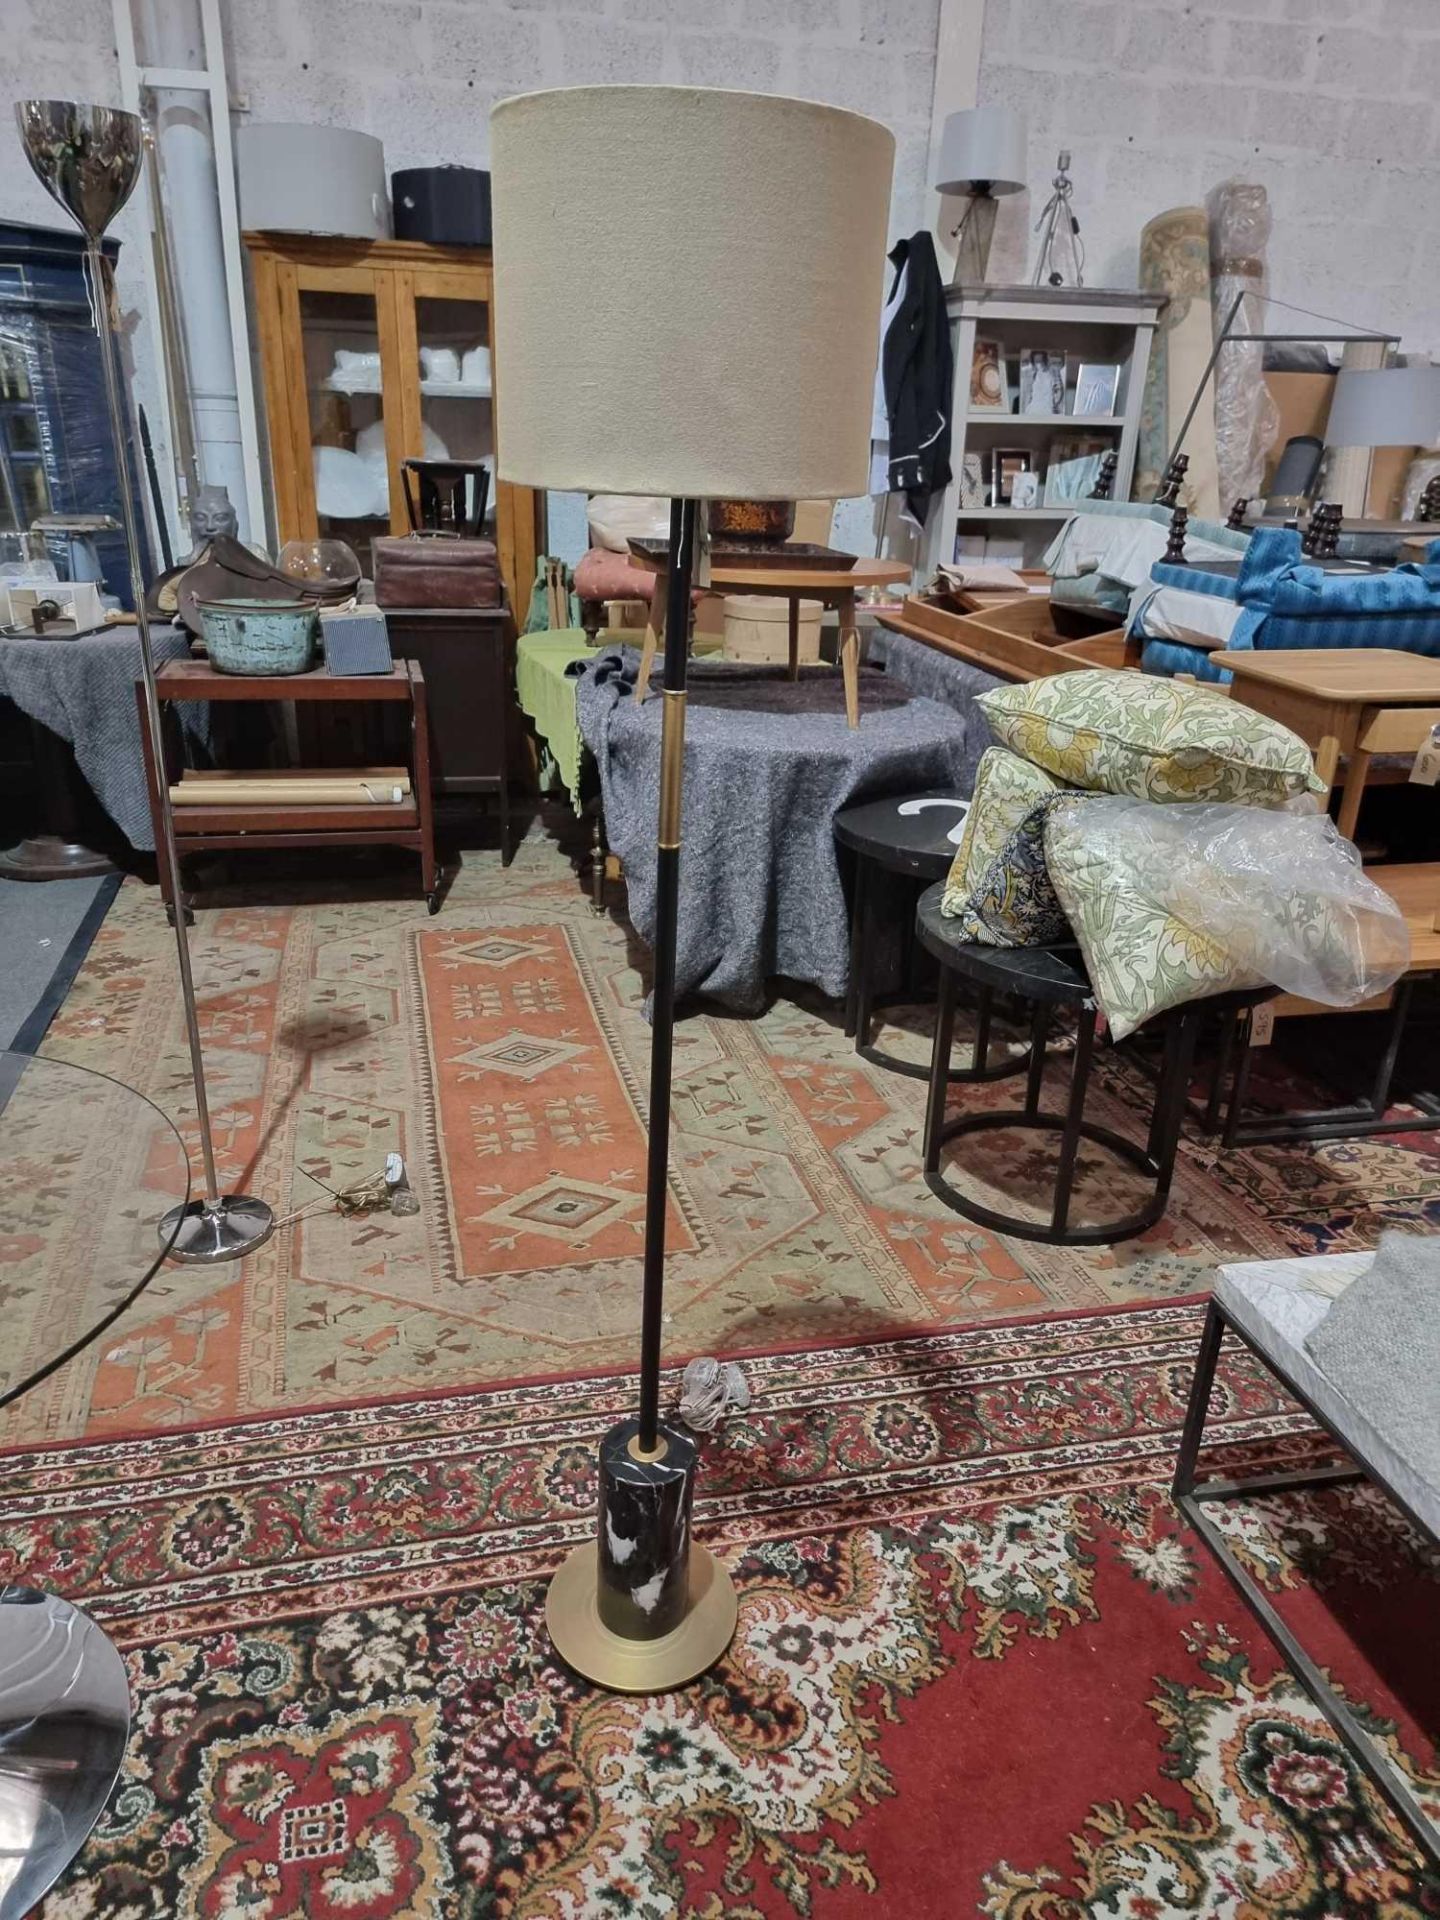 R V Astley Alix Floor Lamp - Antique Brass And Black Marble, Black And Antique Brass Floor Lamp W